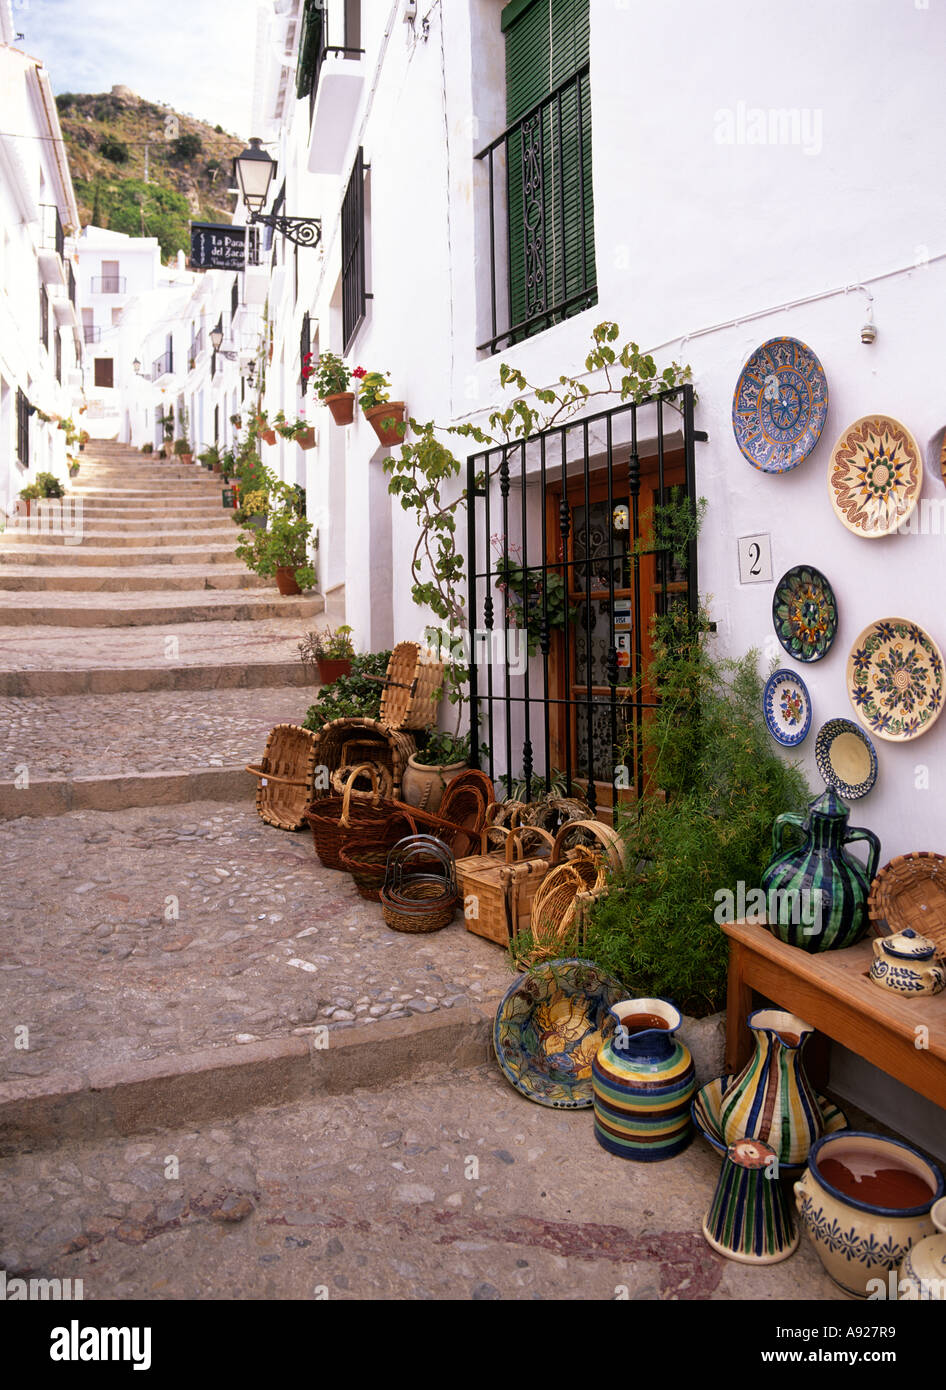 A street of steps in the picturesque white town of Frigiliana, near Nerja,  Malaga, southern Spain Stock Photo - Alamy